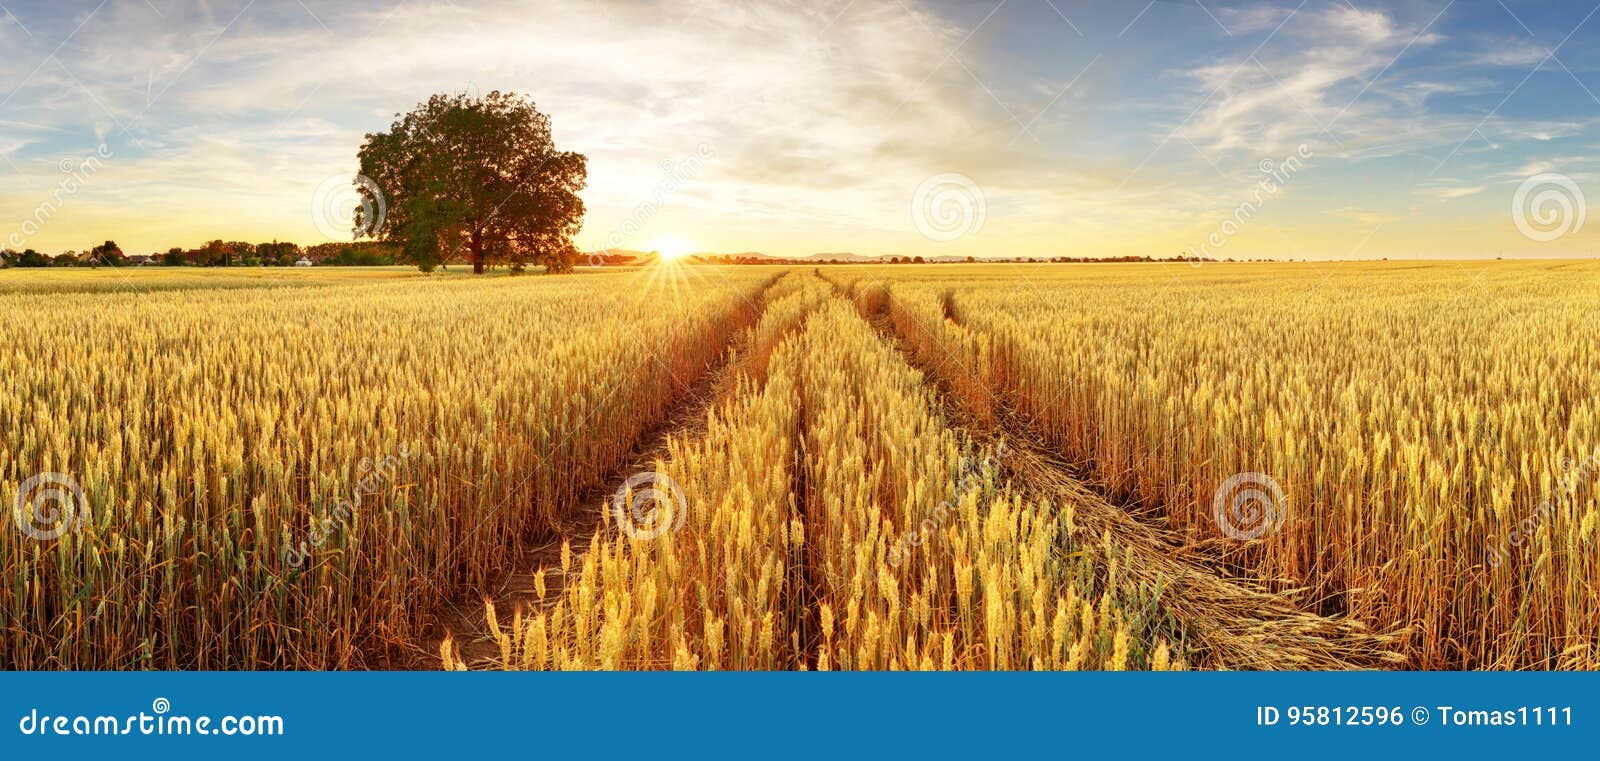 gold wheat flied panorama with tree at sunset, rural countryside